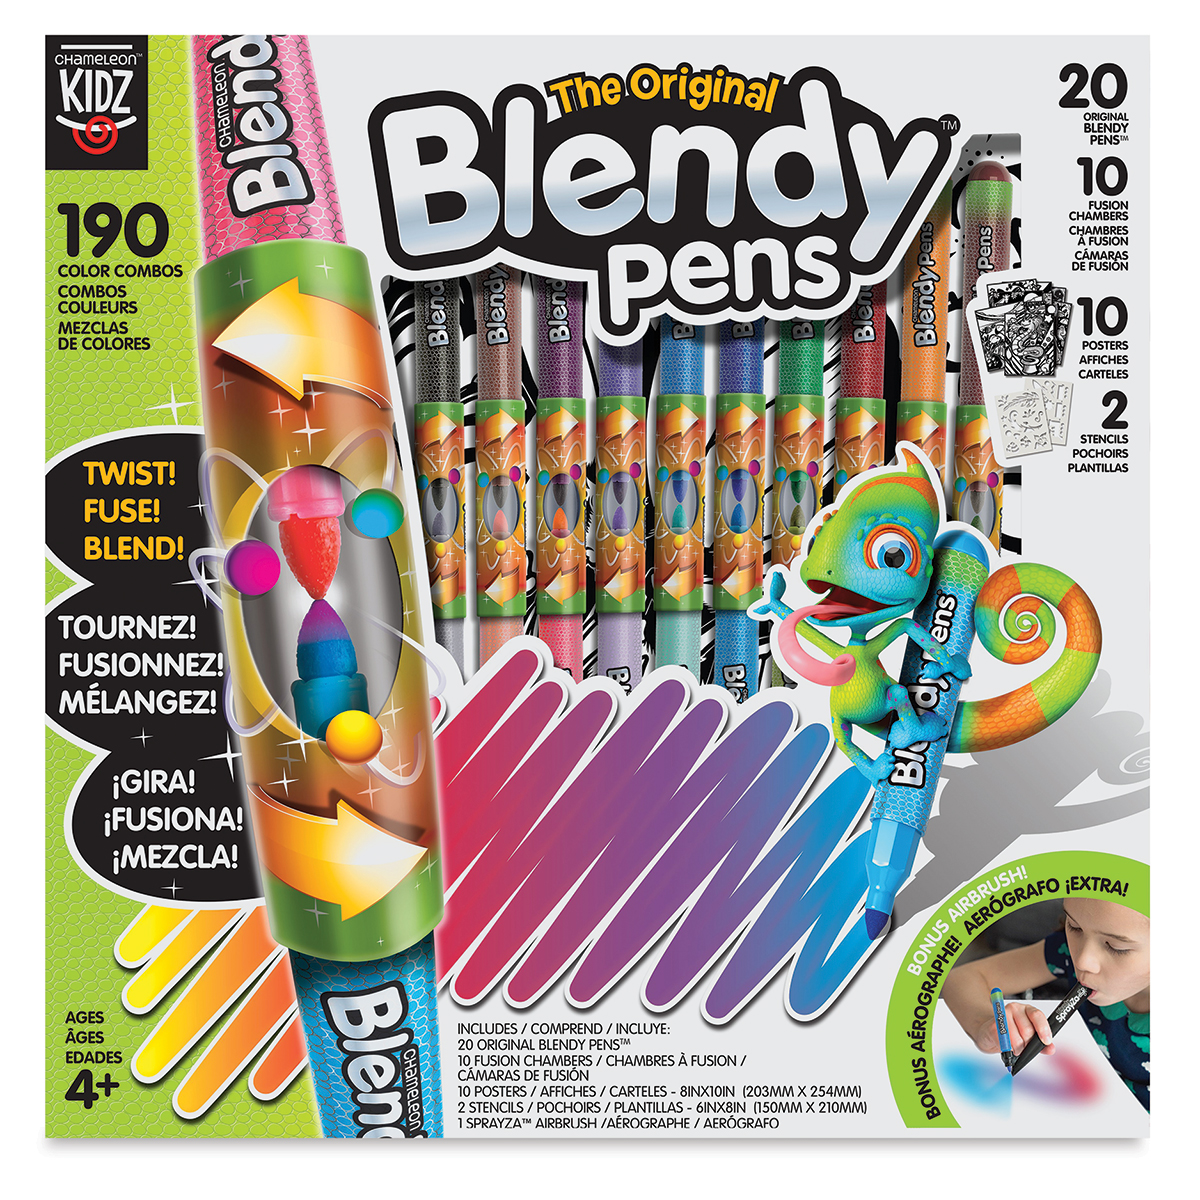 Chameleon Pens and Blendy Pens Make the Perfect Holiday Gift